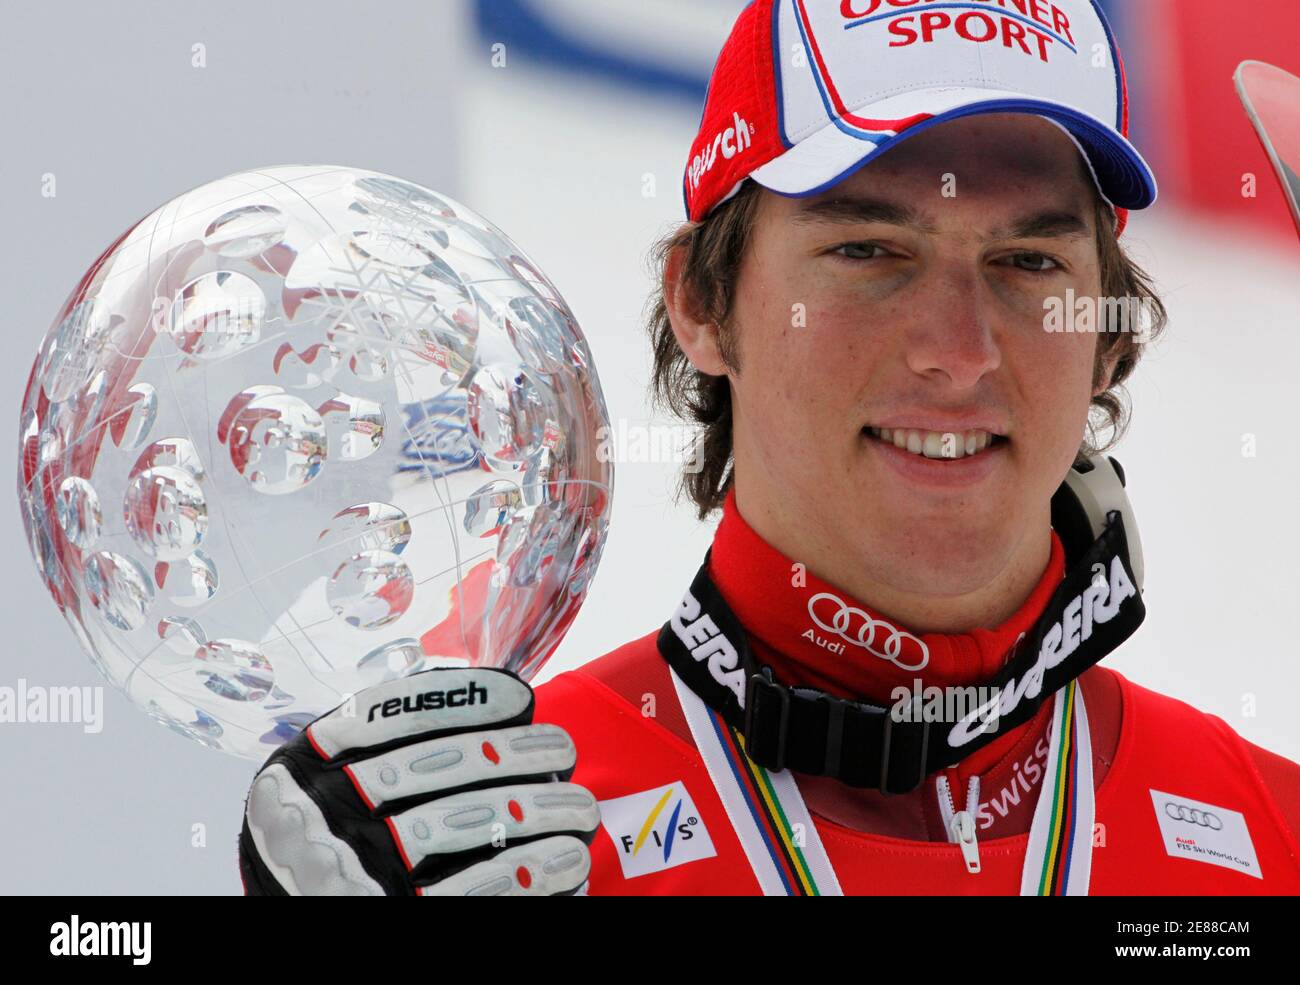 Carlo Janka of Switzerland poses with the men's overall Alpine Skiing World Cup trophy at the season's finals in Garmisch-Partenkirchen March 13, 2010.    REUTERS/Wolfgang Rattay   (GERMANY - Tags: SPORT SKIING) Foto Stock